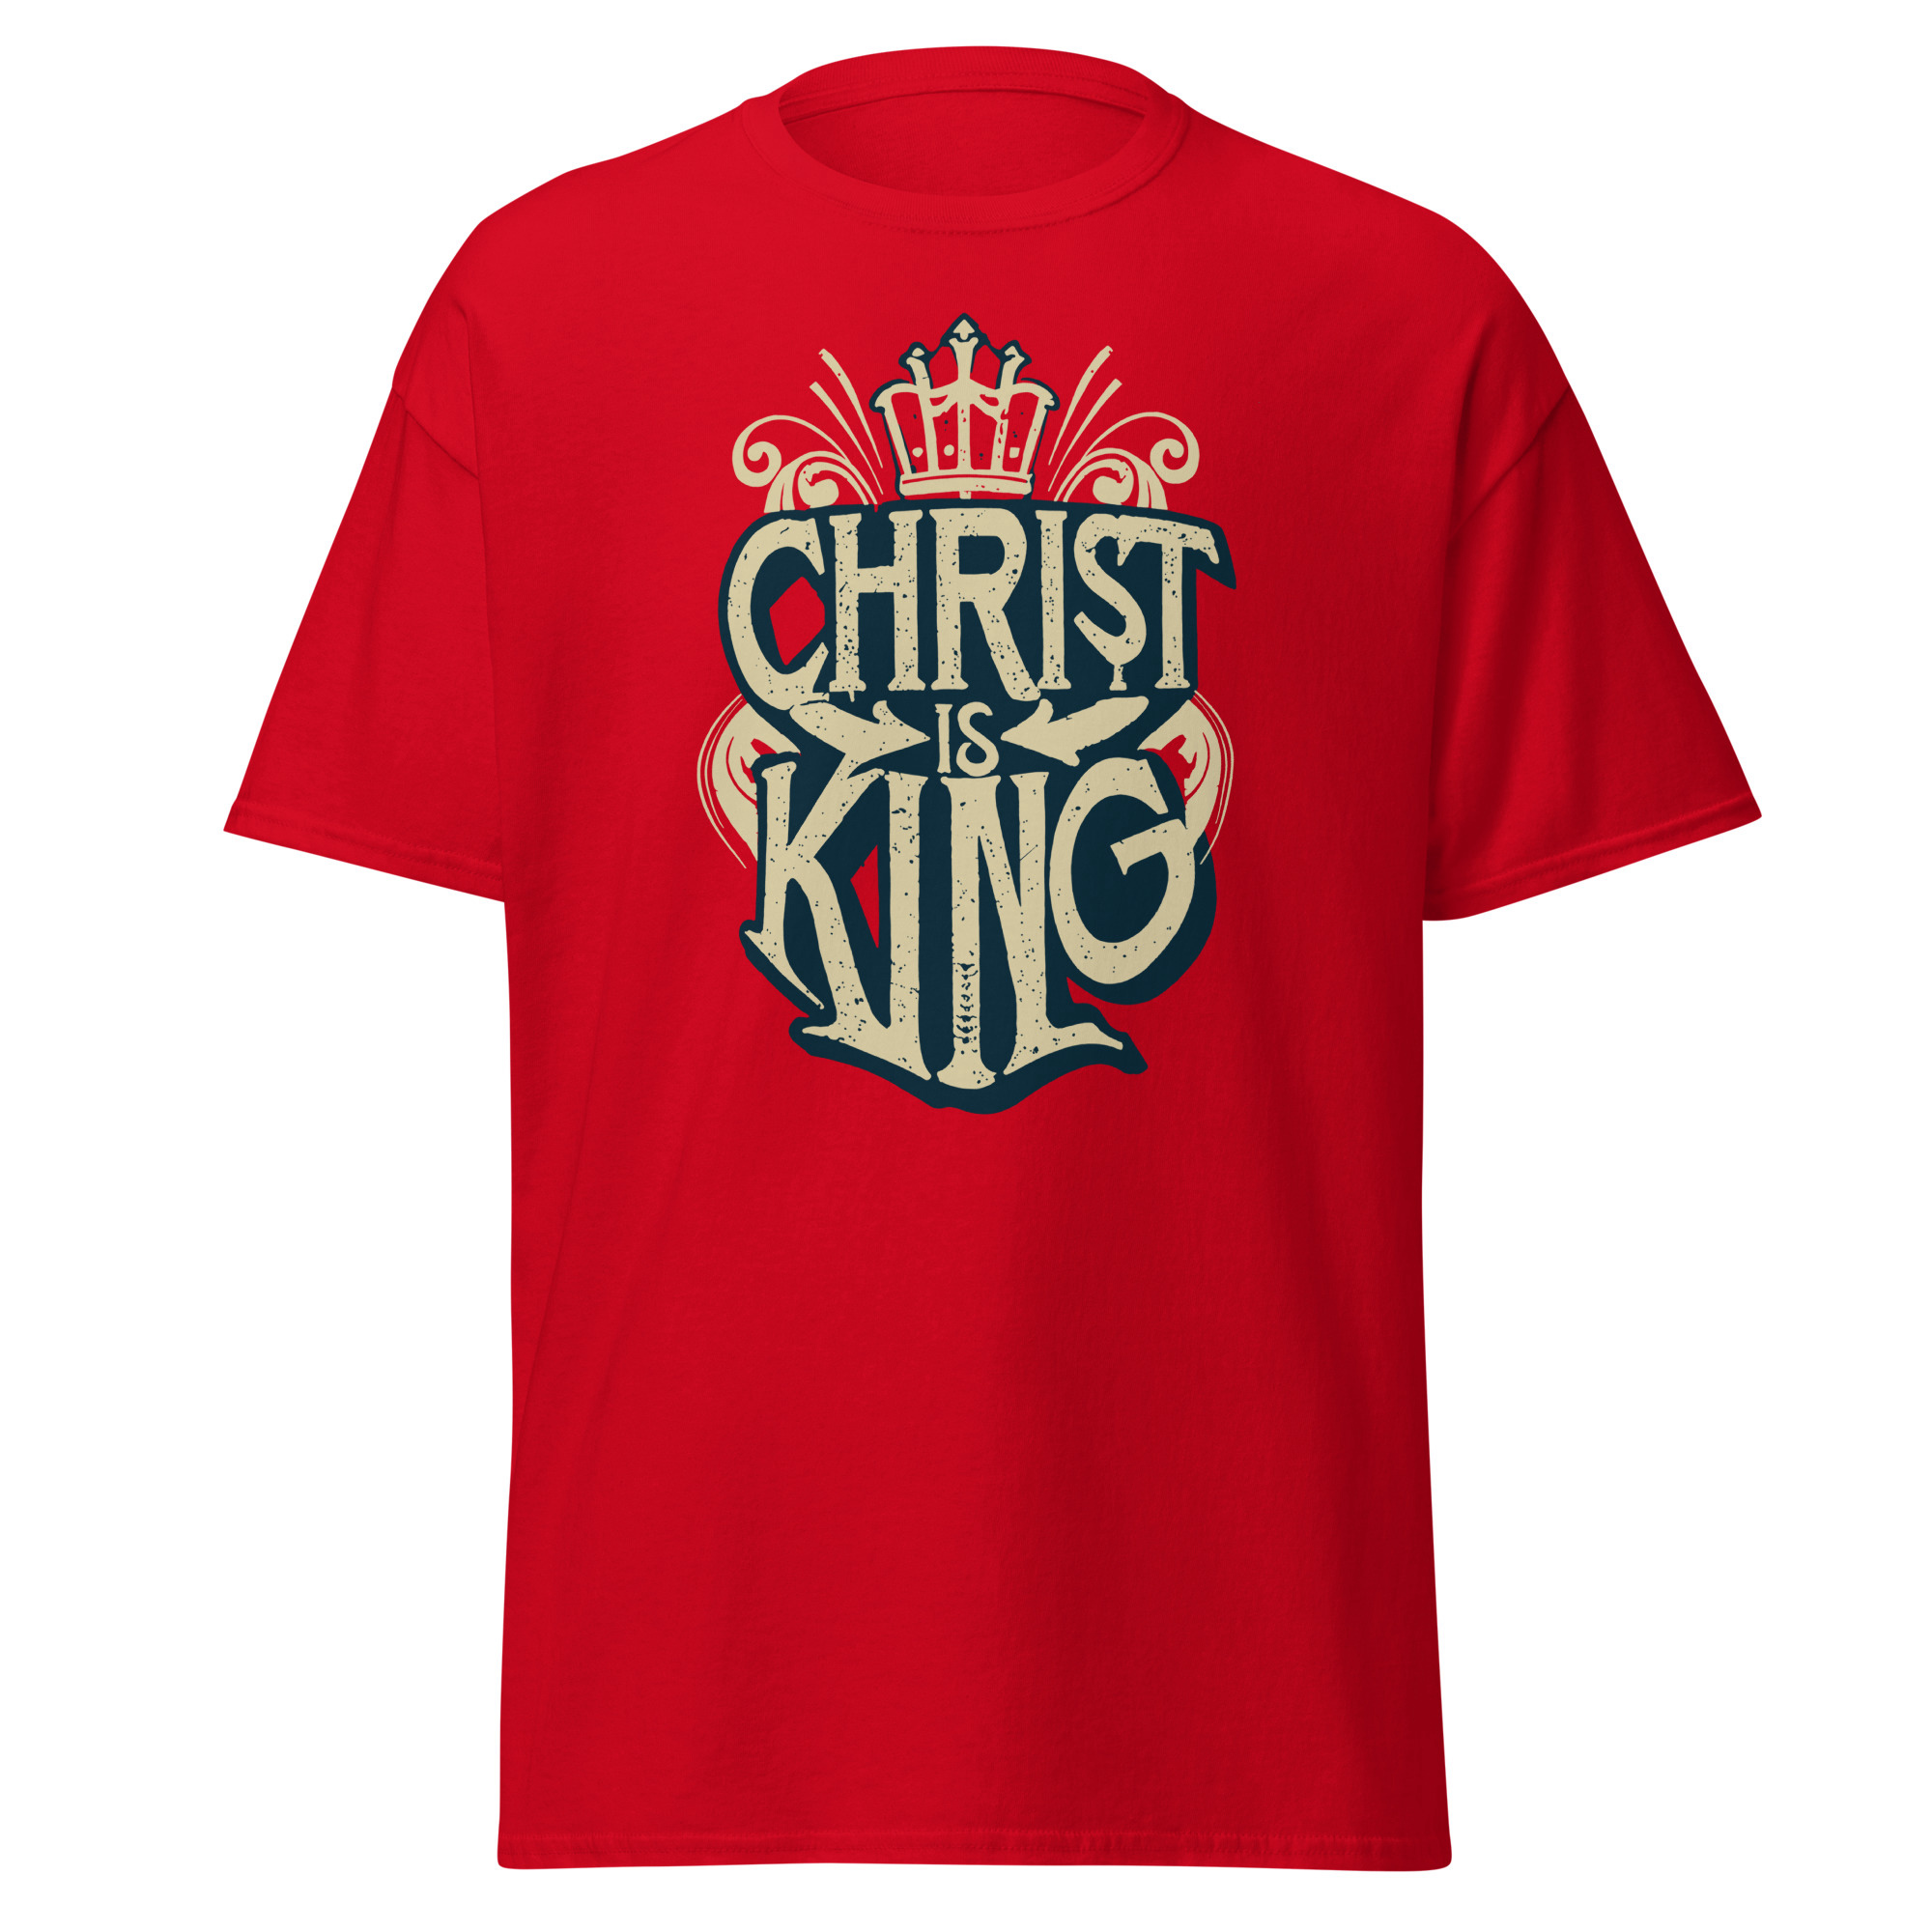 Christ is King T-Shirt - Red / L